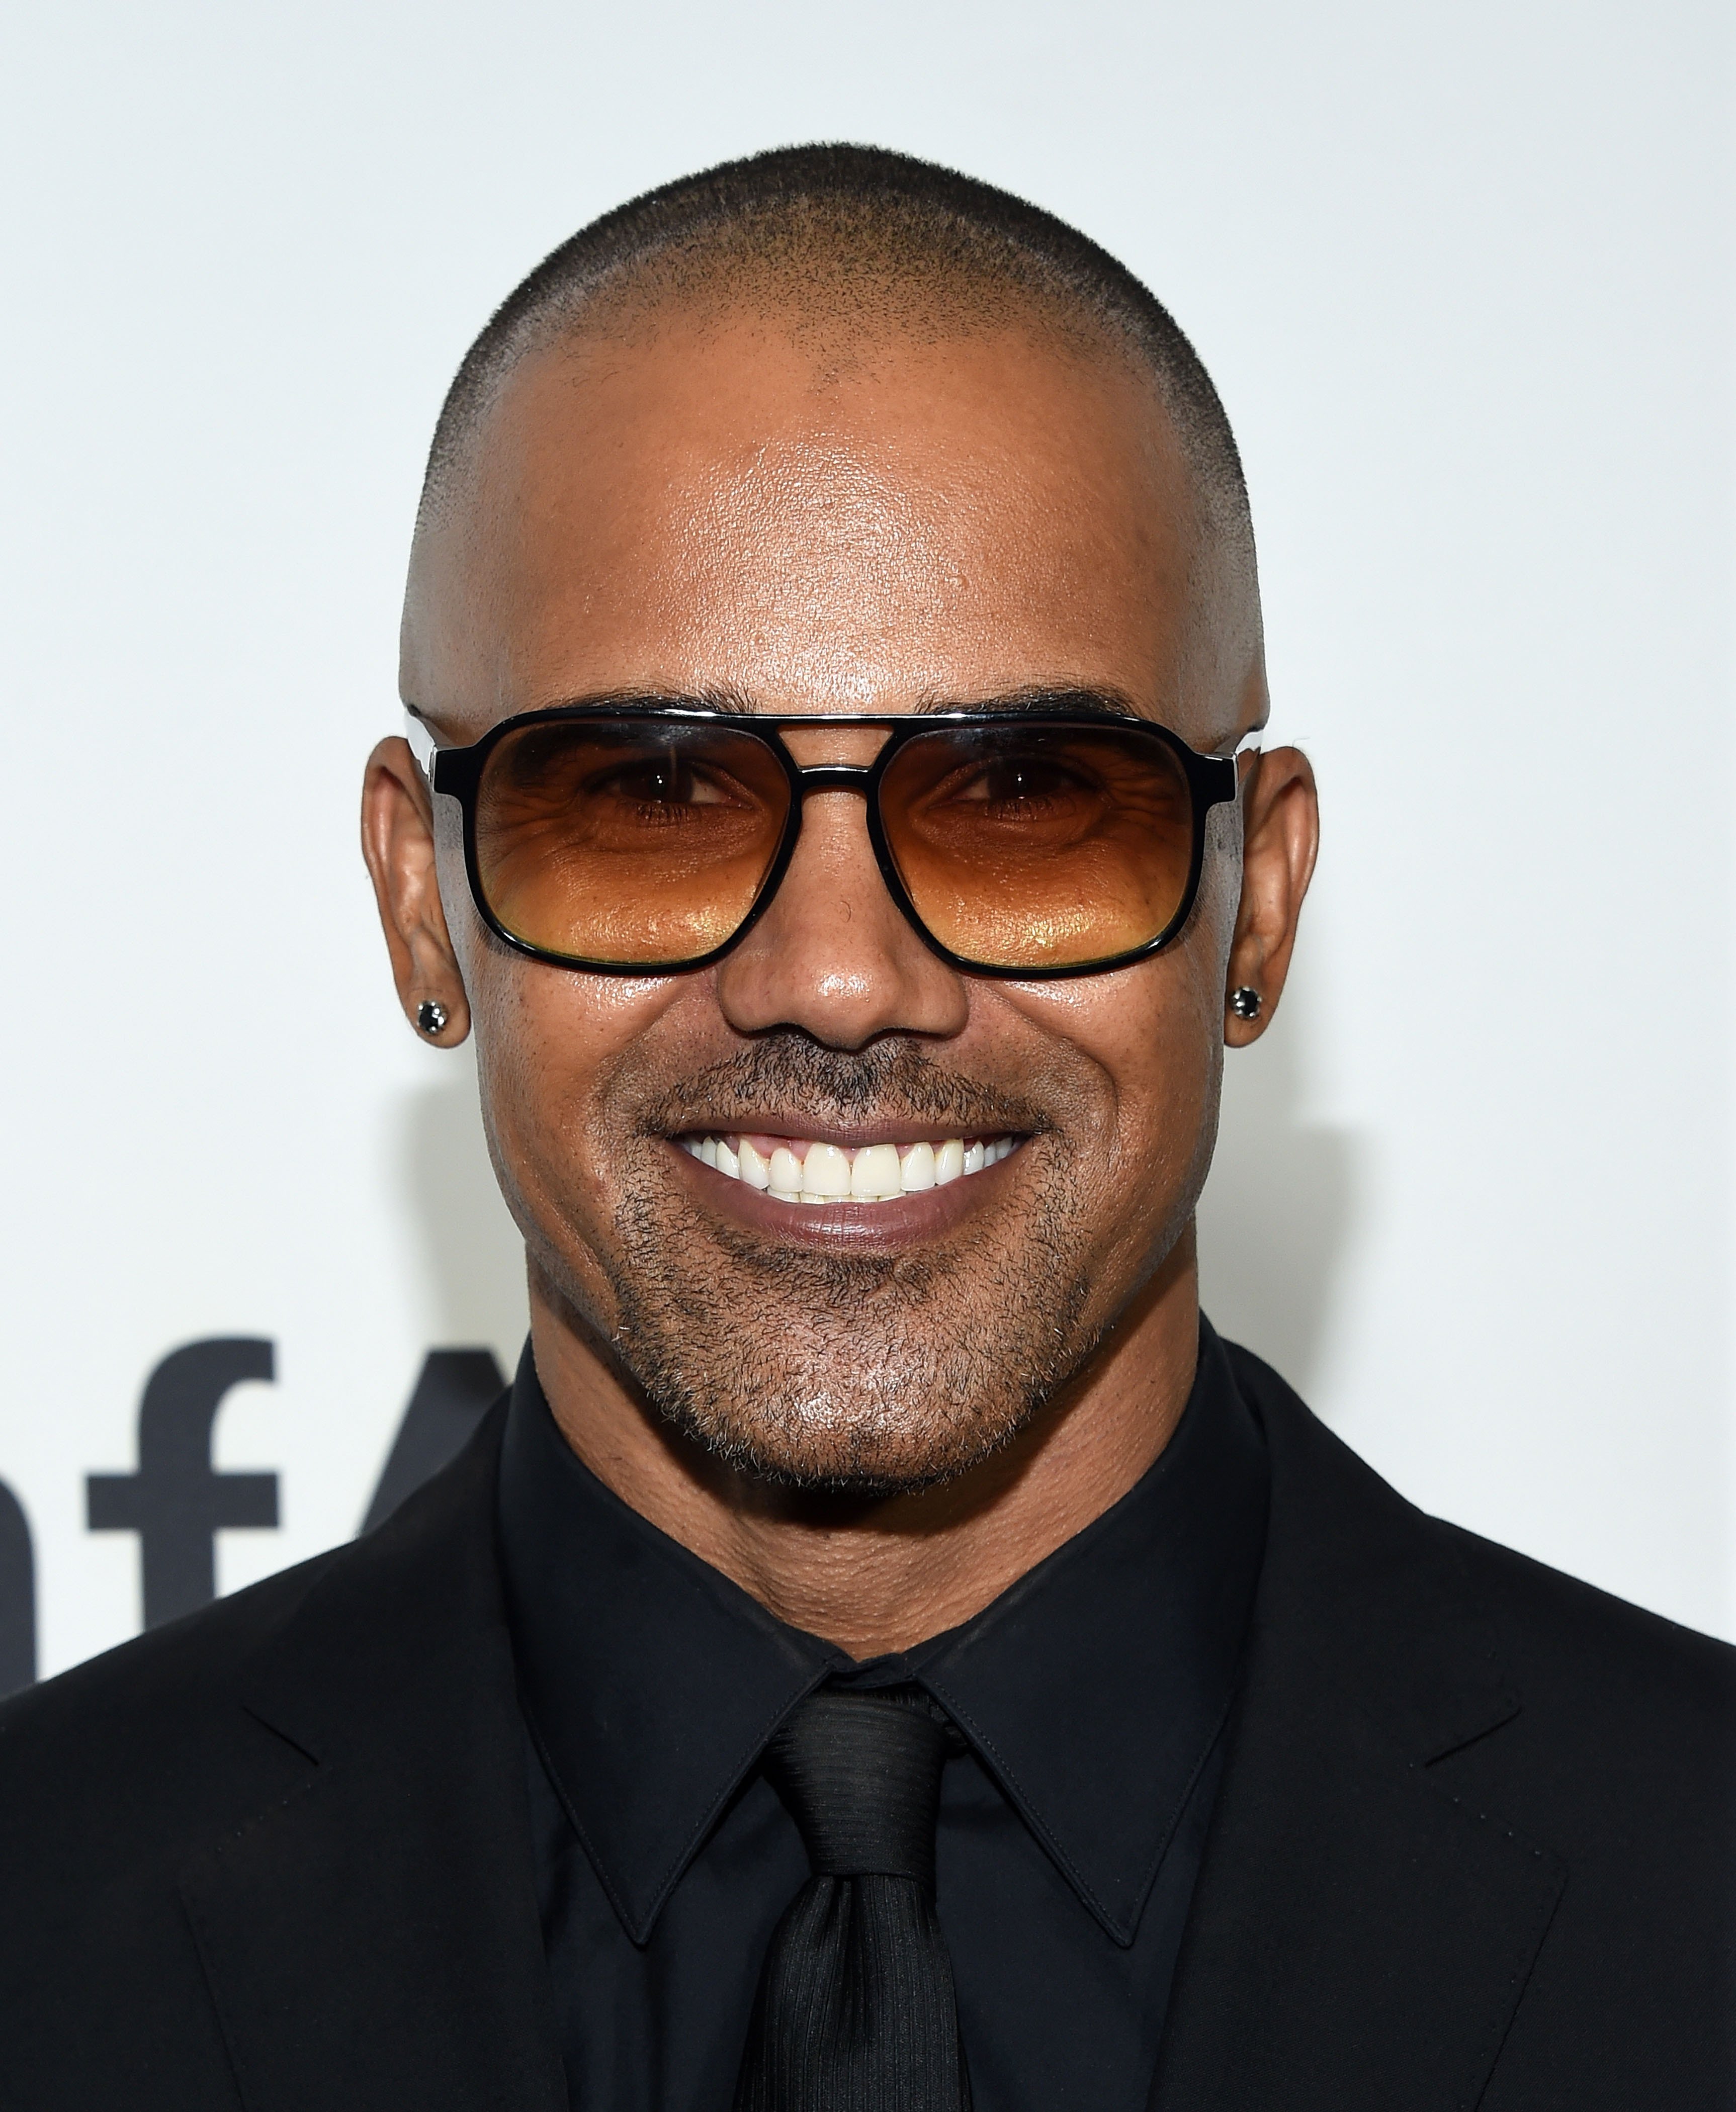 Shemar Moore at amfAR's Inspiration Gala Los Angeles on October 27, 2016 in Hollywood, California. | Photo: Getty Images